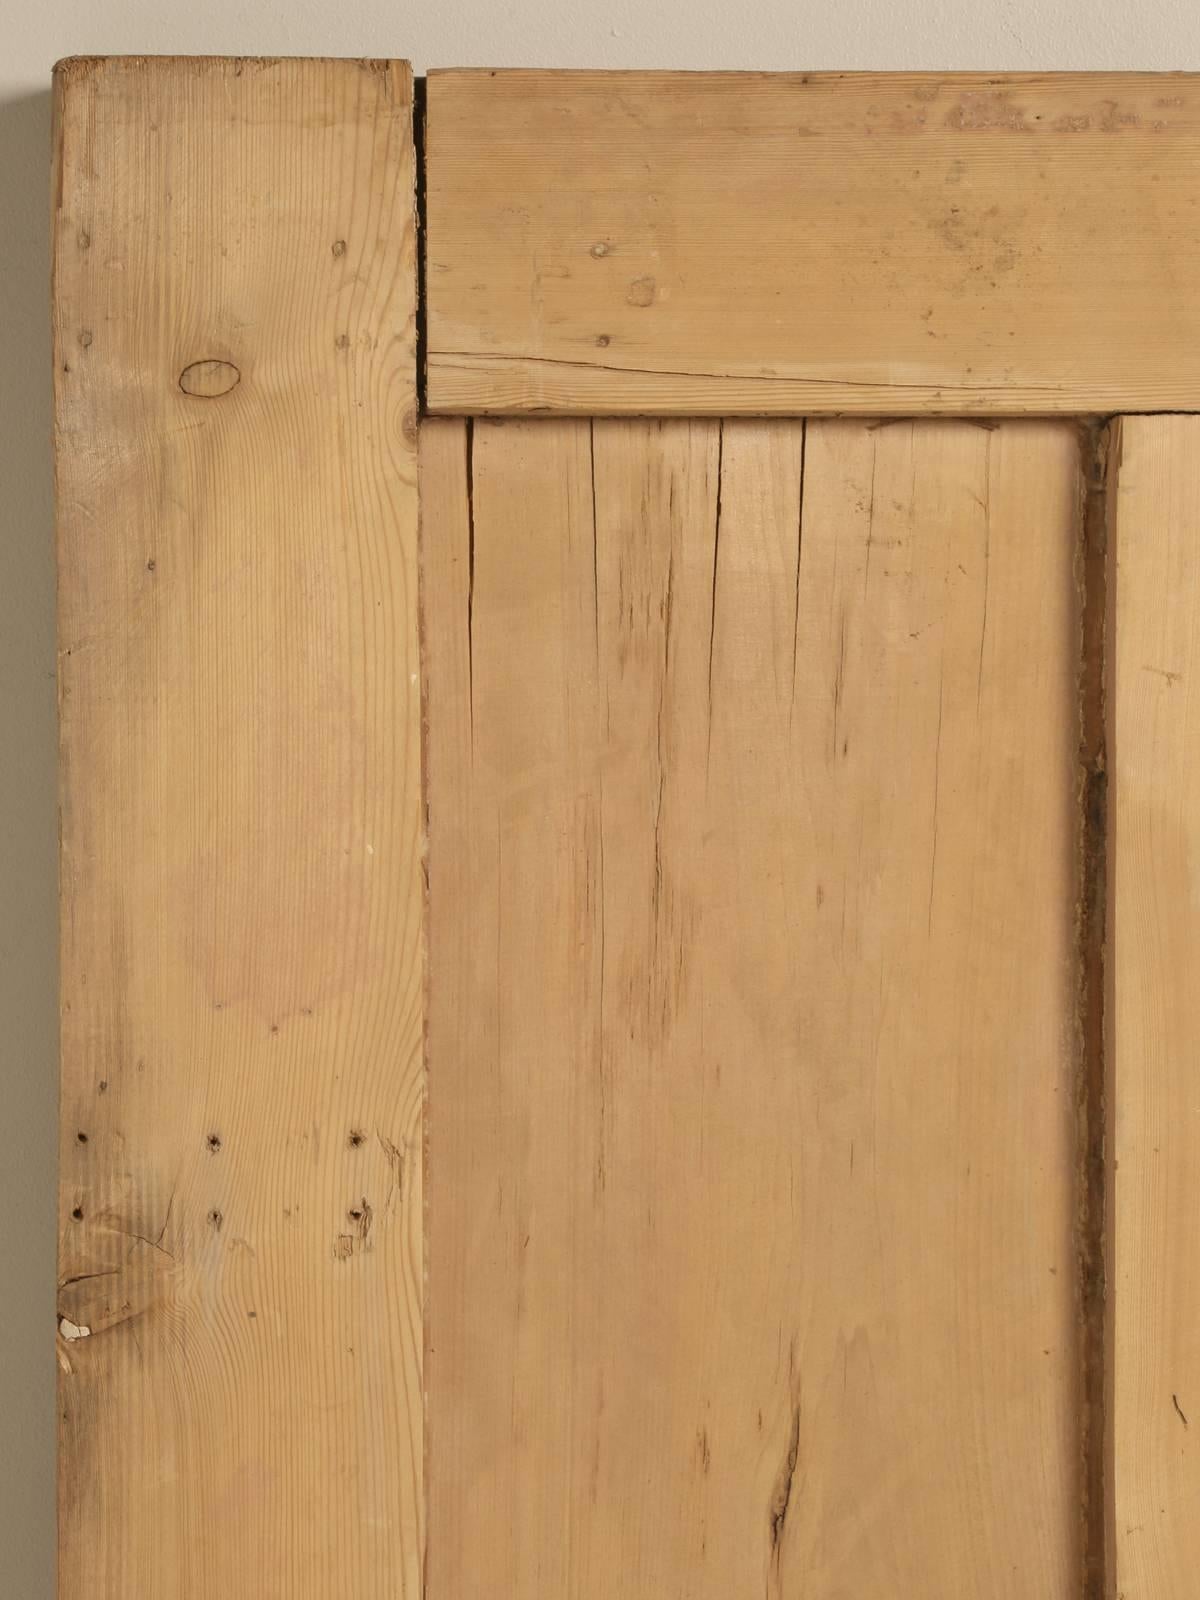 Antique Irish pine exterior door that I bought from a wonderful Irish pine dealer in the town of Derby, England, over 20 years ago. I completely forgot that I had stashed them away. We have a total of four doors, three of which are interior, and two